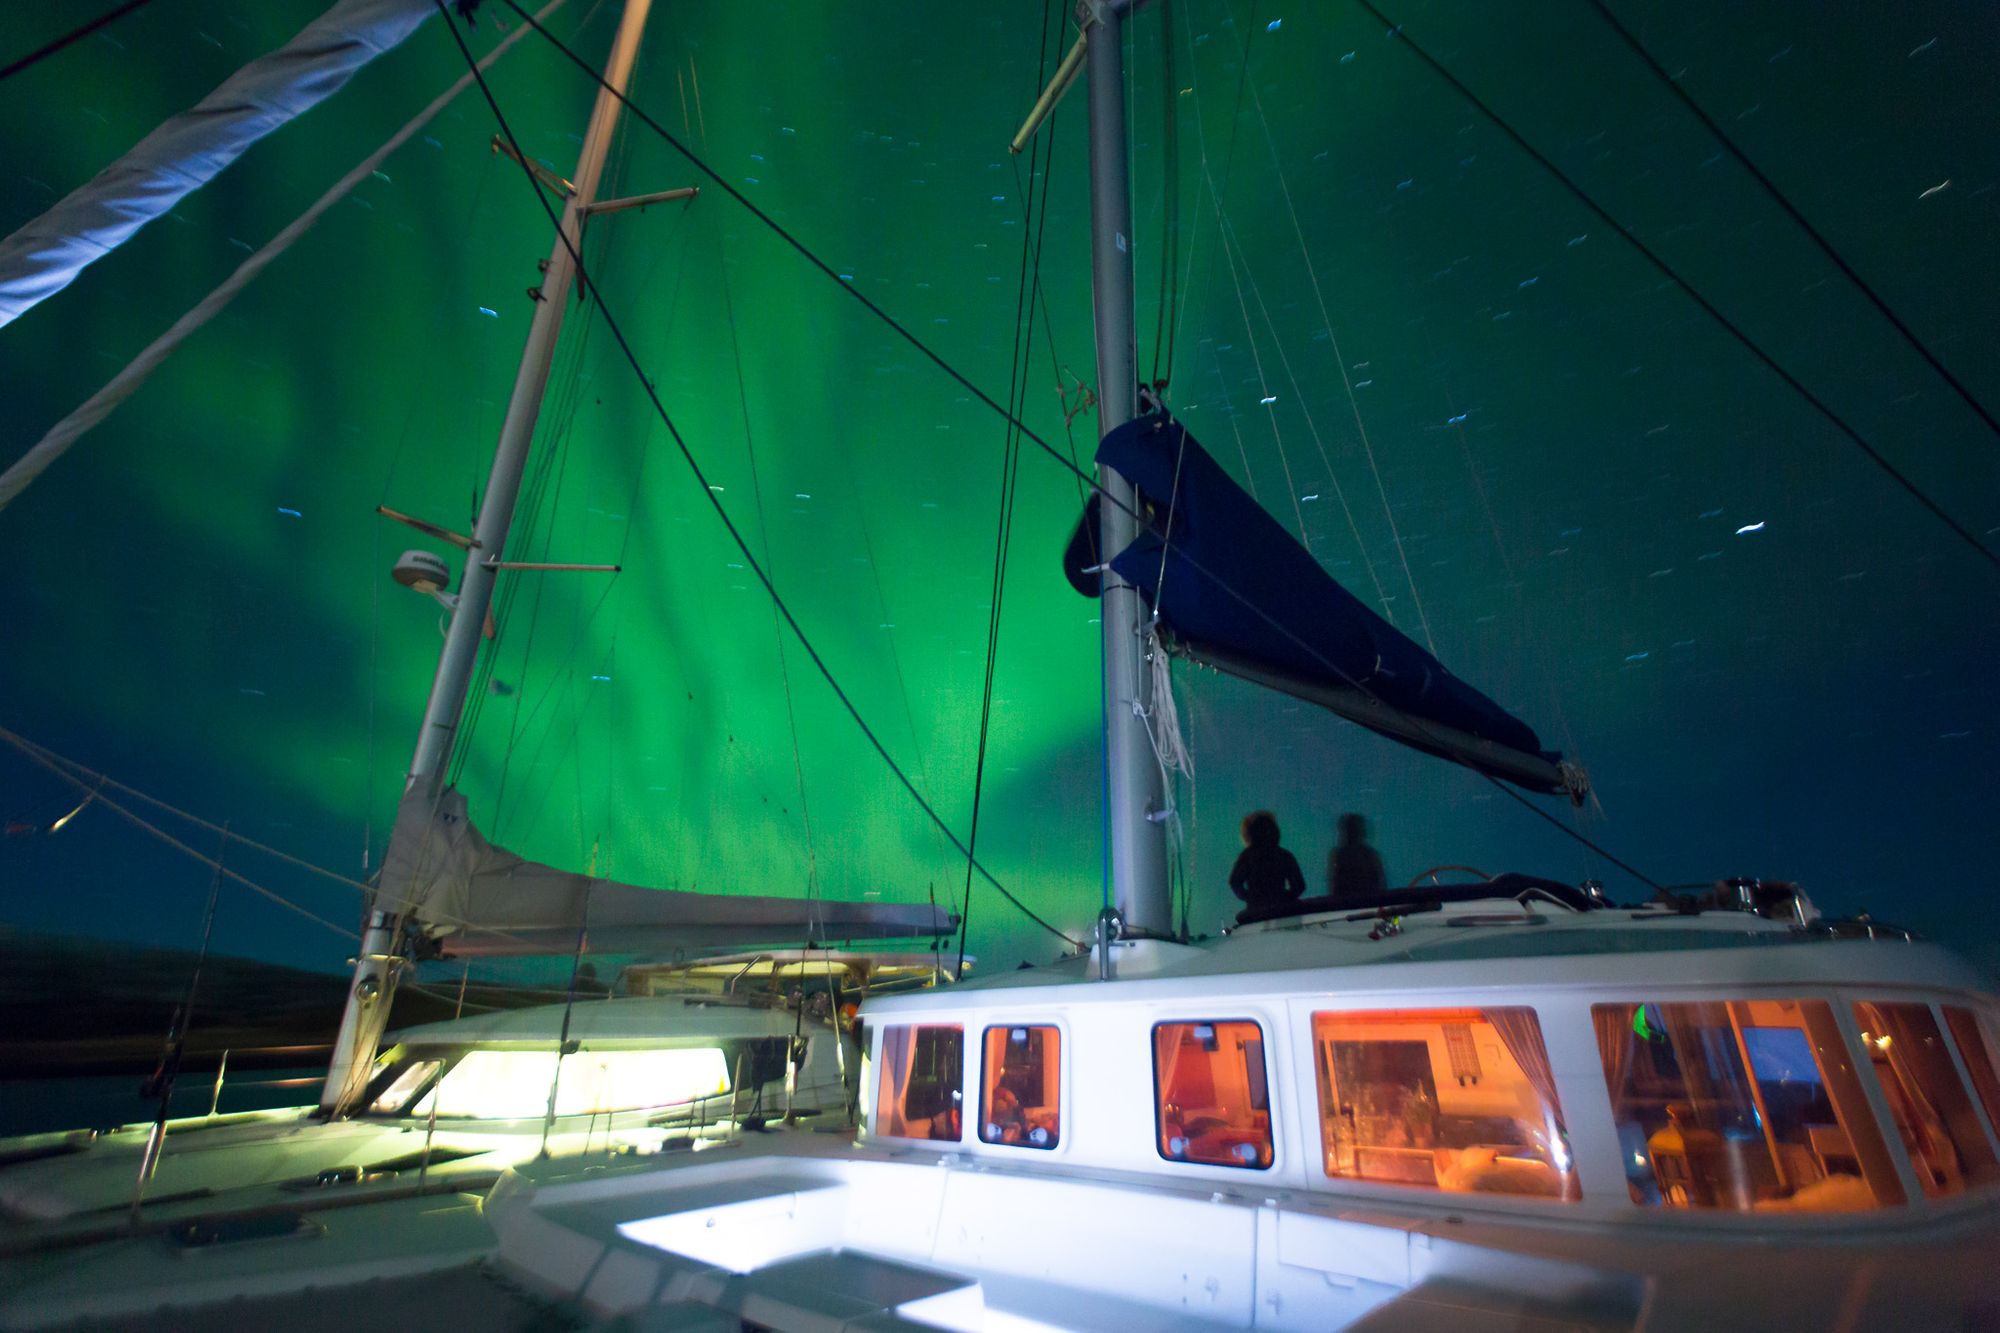 Sailing boat at night, with the northern lights behind it.